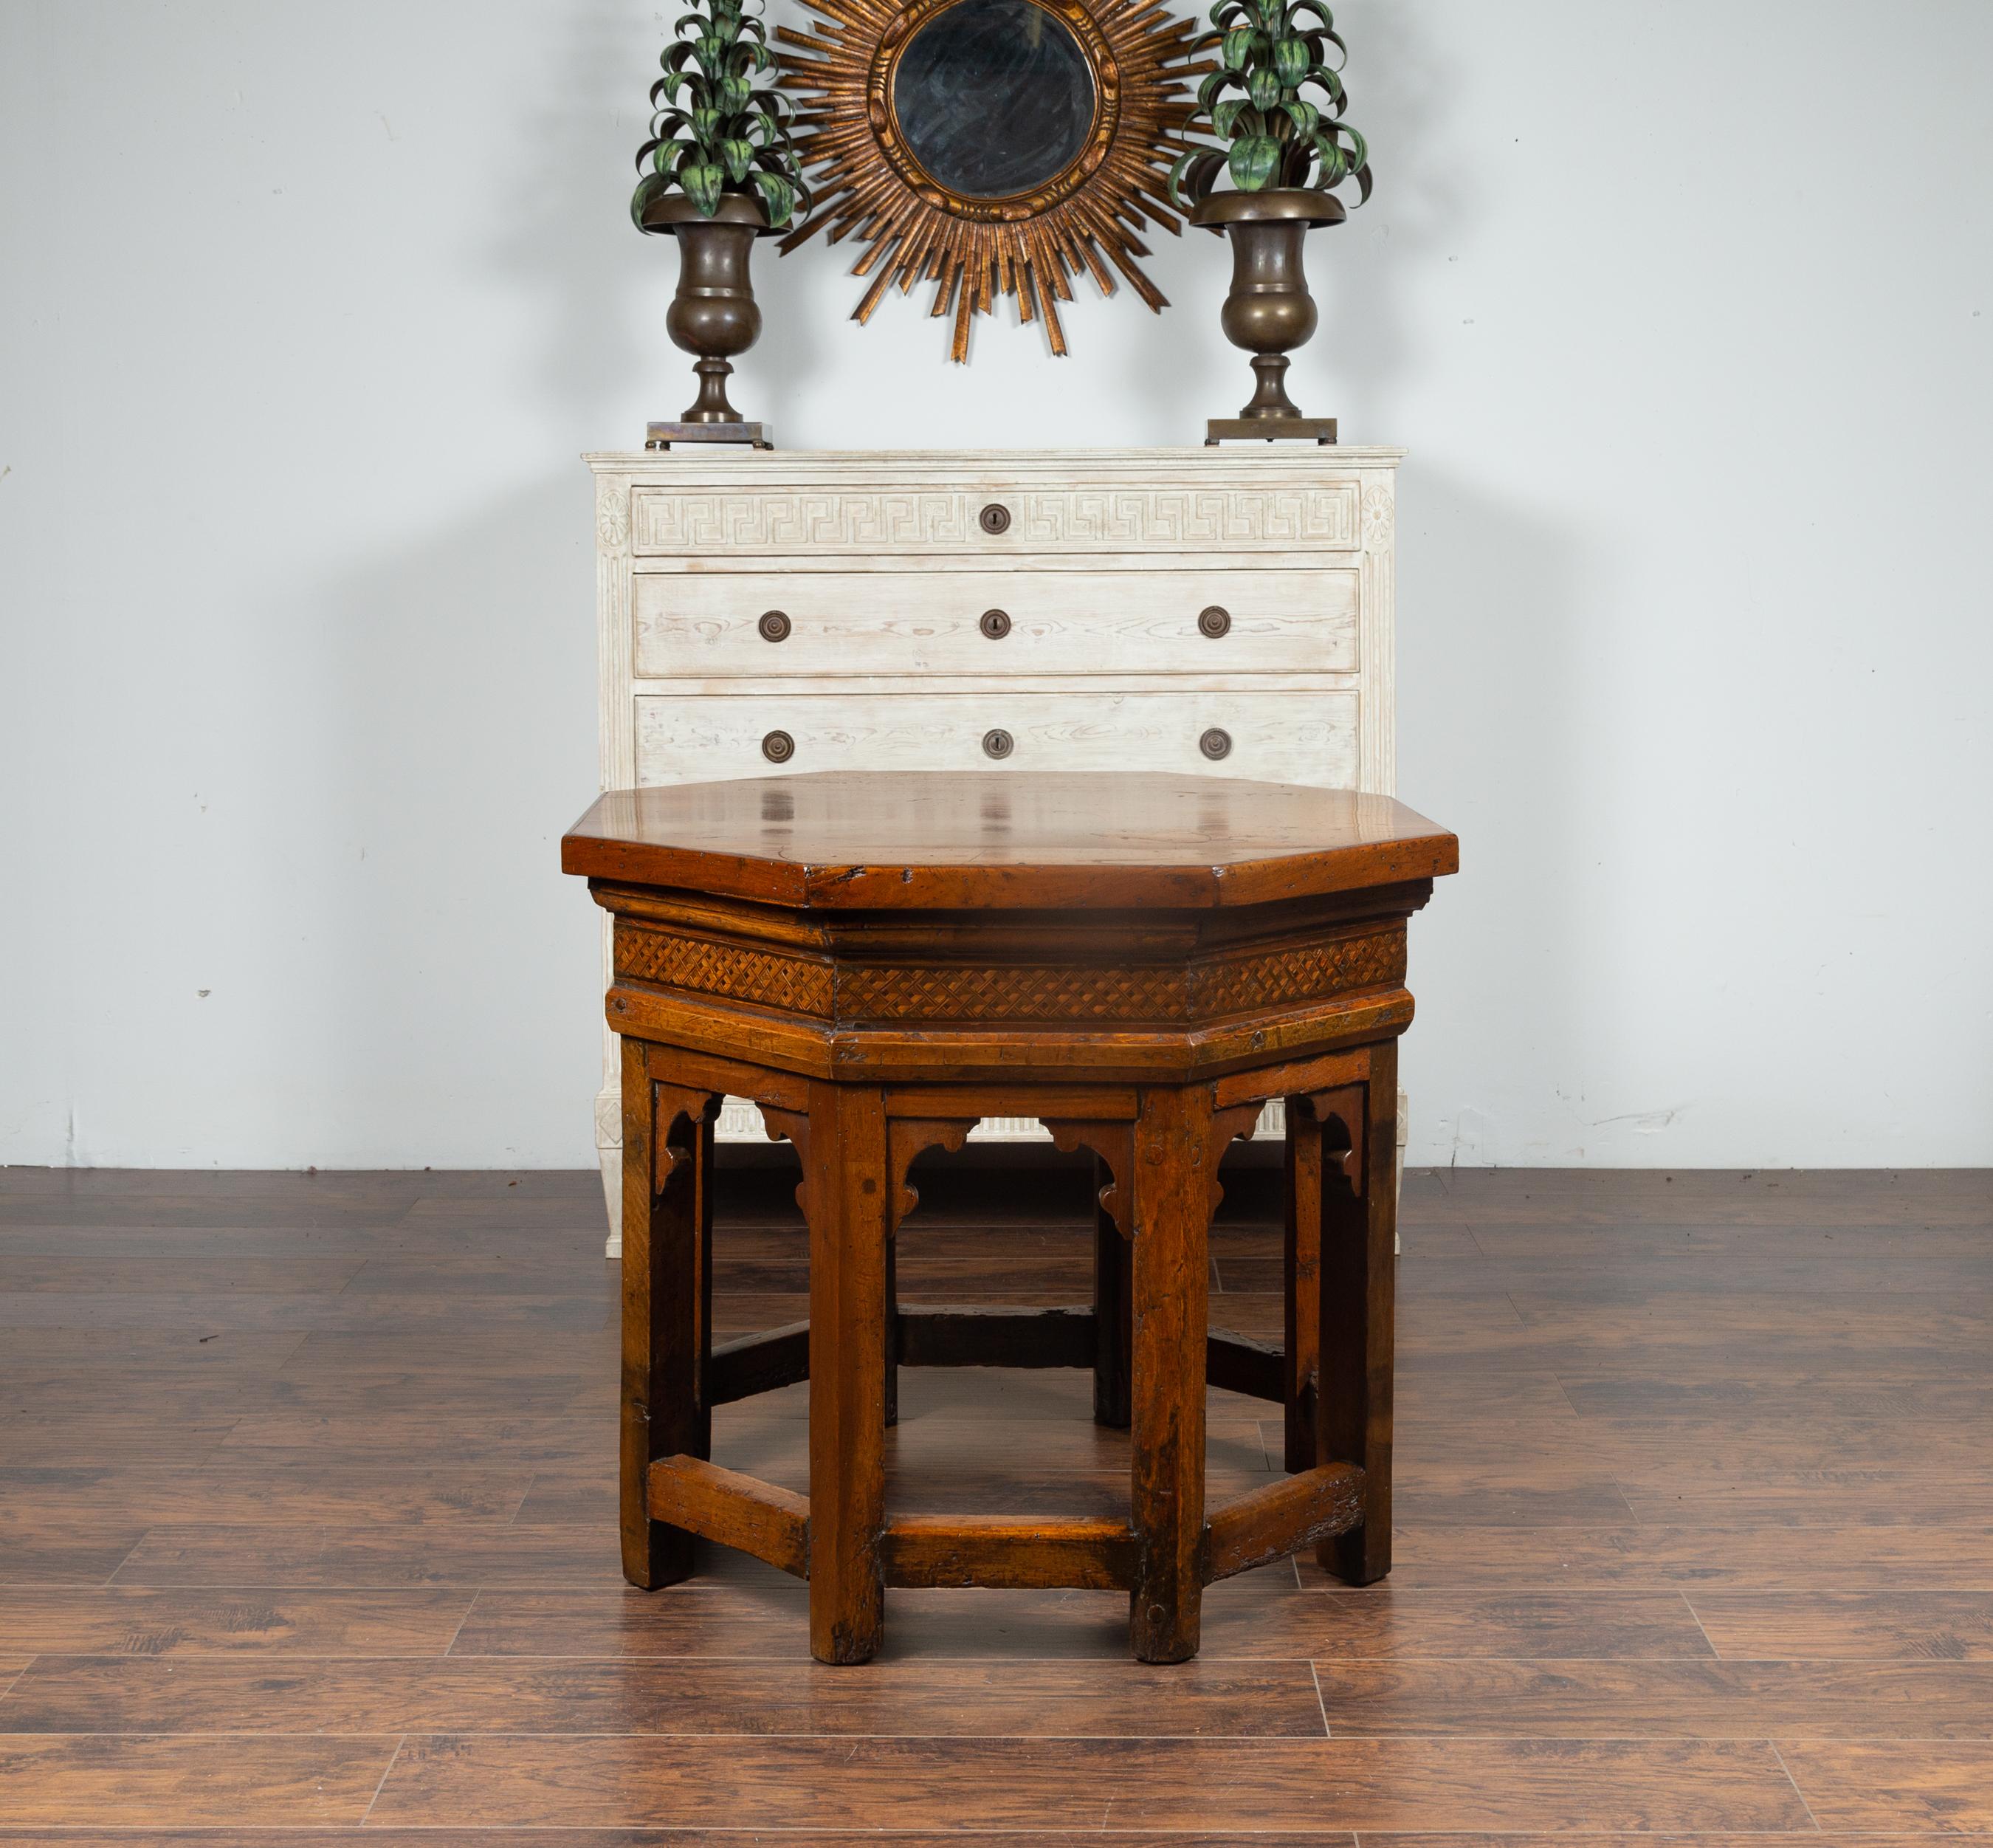 An Italian walnut octagonal center table from the mid-19th century (or earlier), with geometrical inlay. We have a near pair available with slight variations in the dimensions, please check item LU836716746111. Born in Italy during the 19th century,